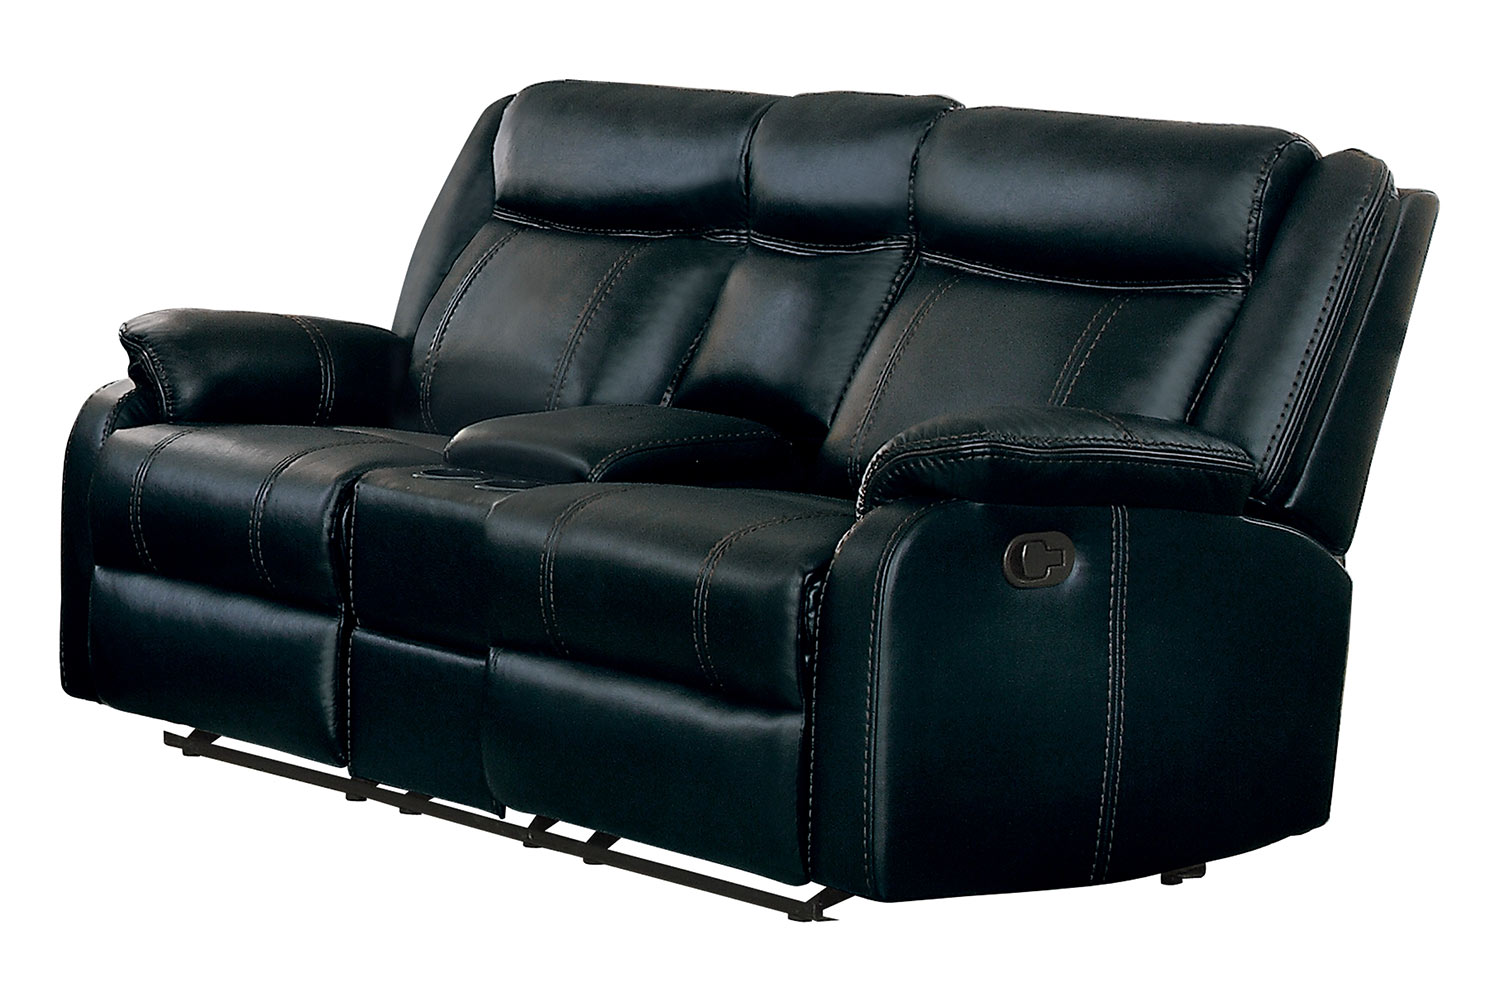 Homelegance Jude Double Glider Reclining Love Seat with Console - Black Leather Gel Match